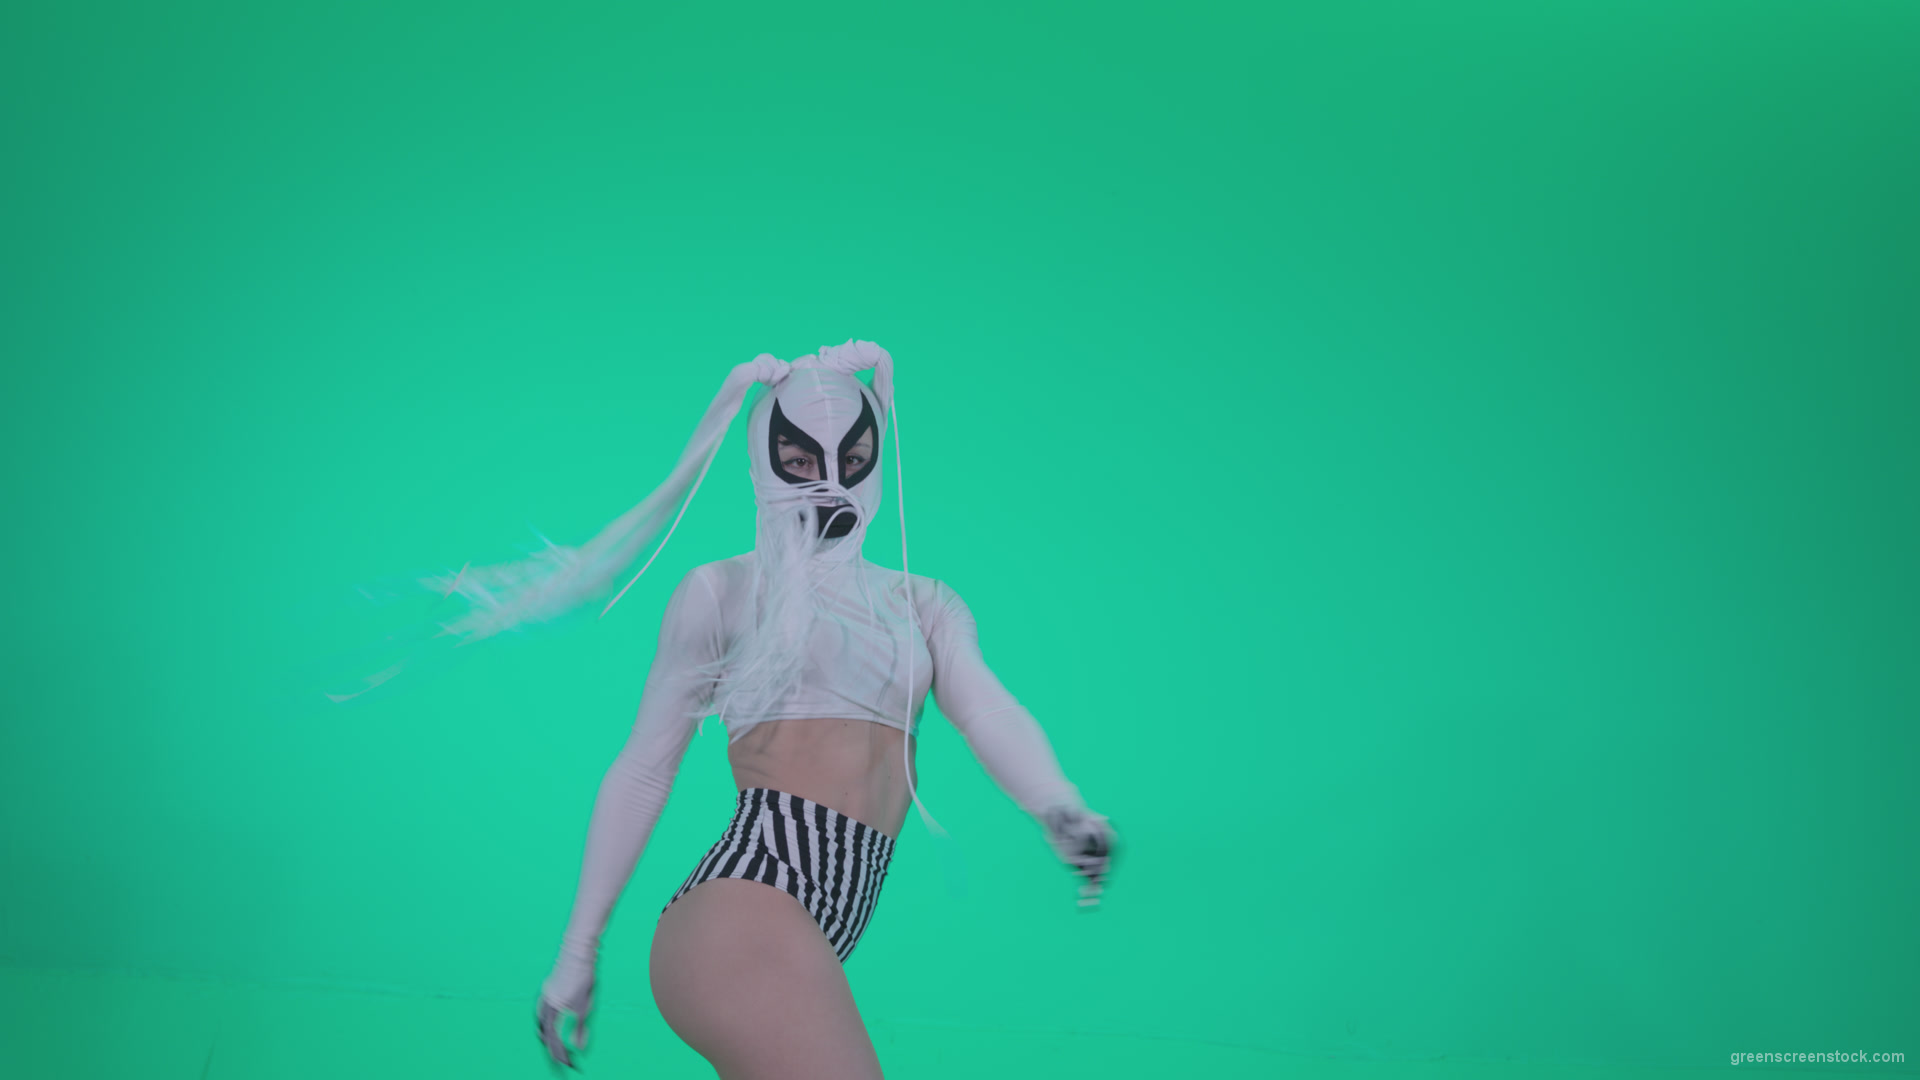 Go-go-Dancer-with-Latex-Top-t9-Green-Screen-Video-Footage_004 Green Screen Stock